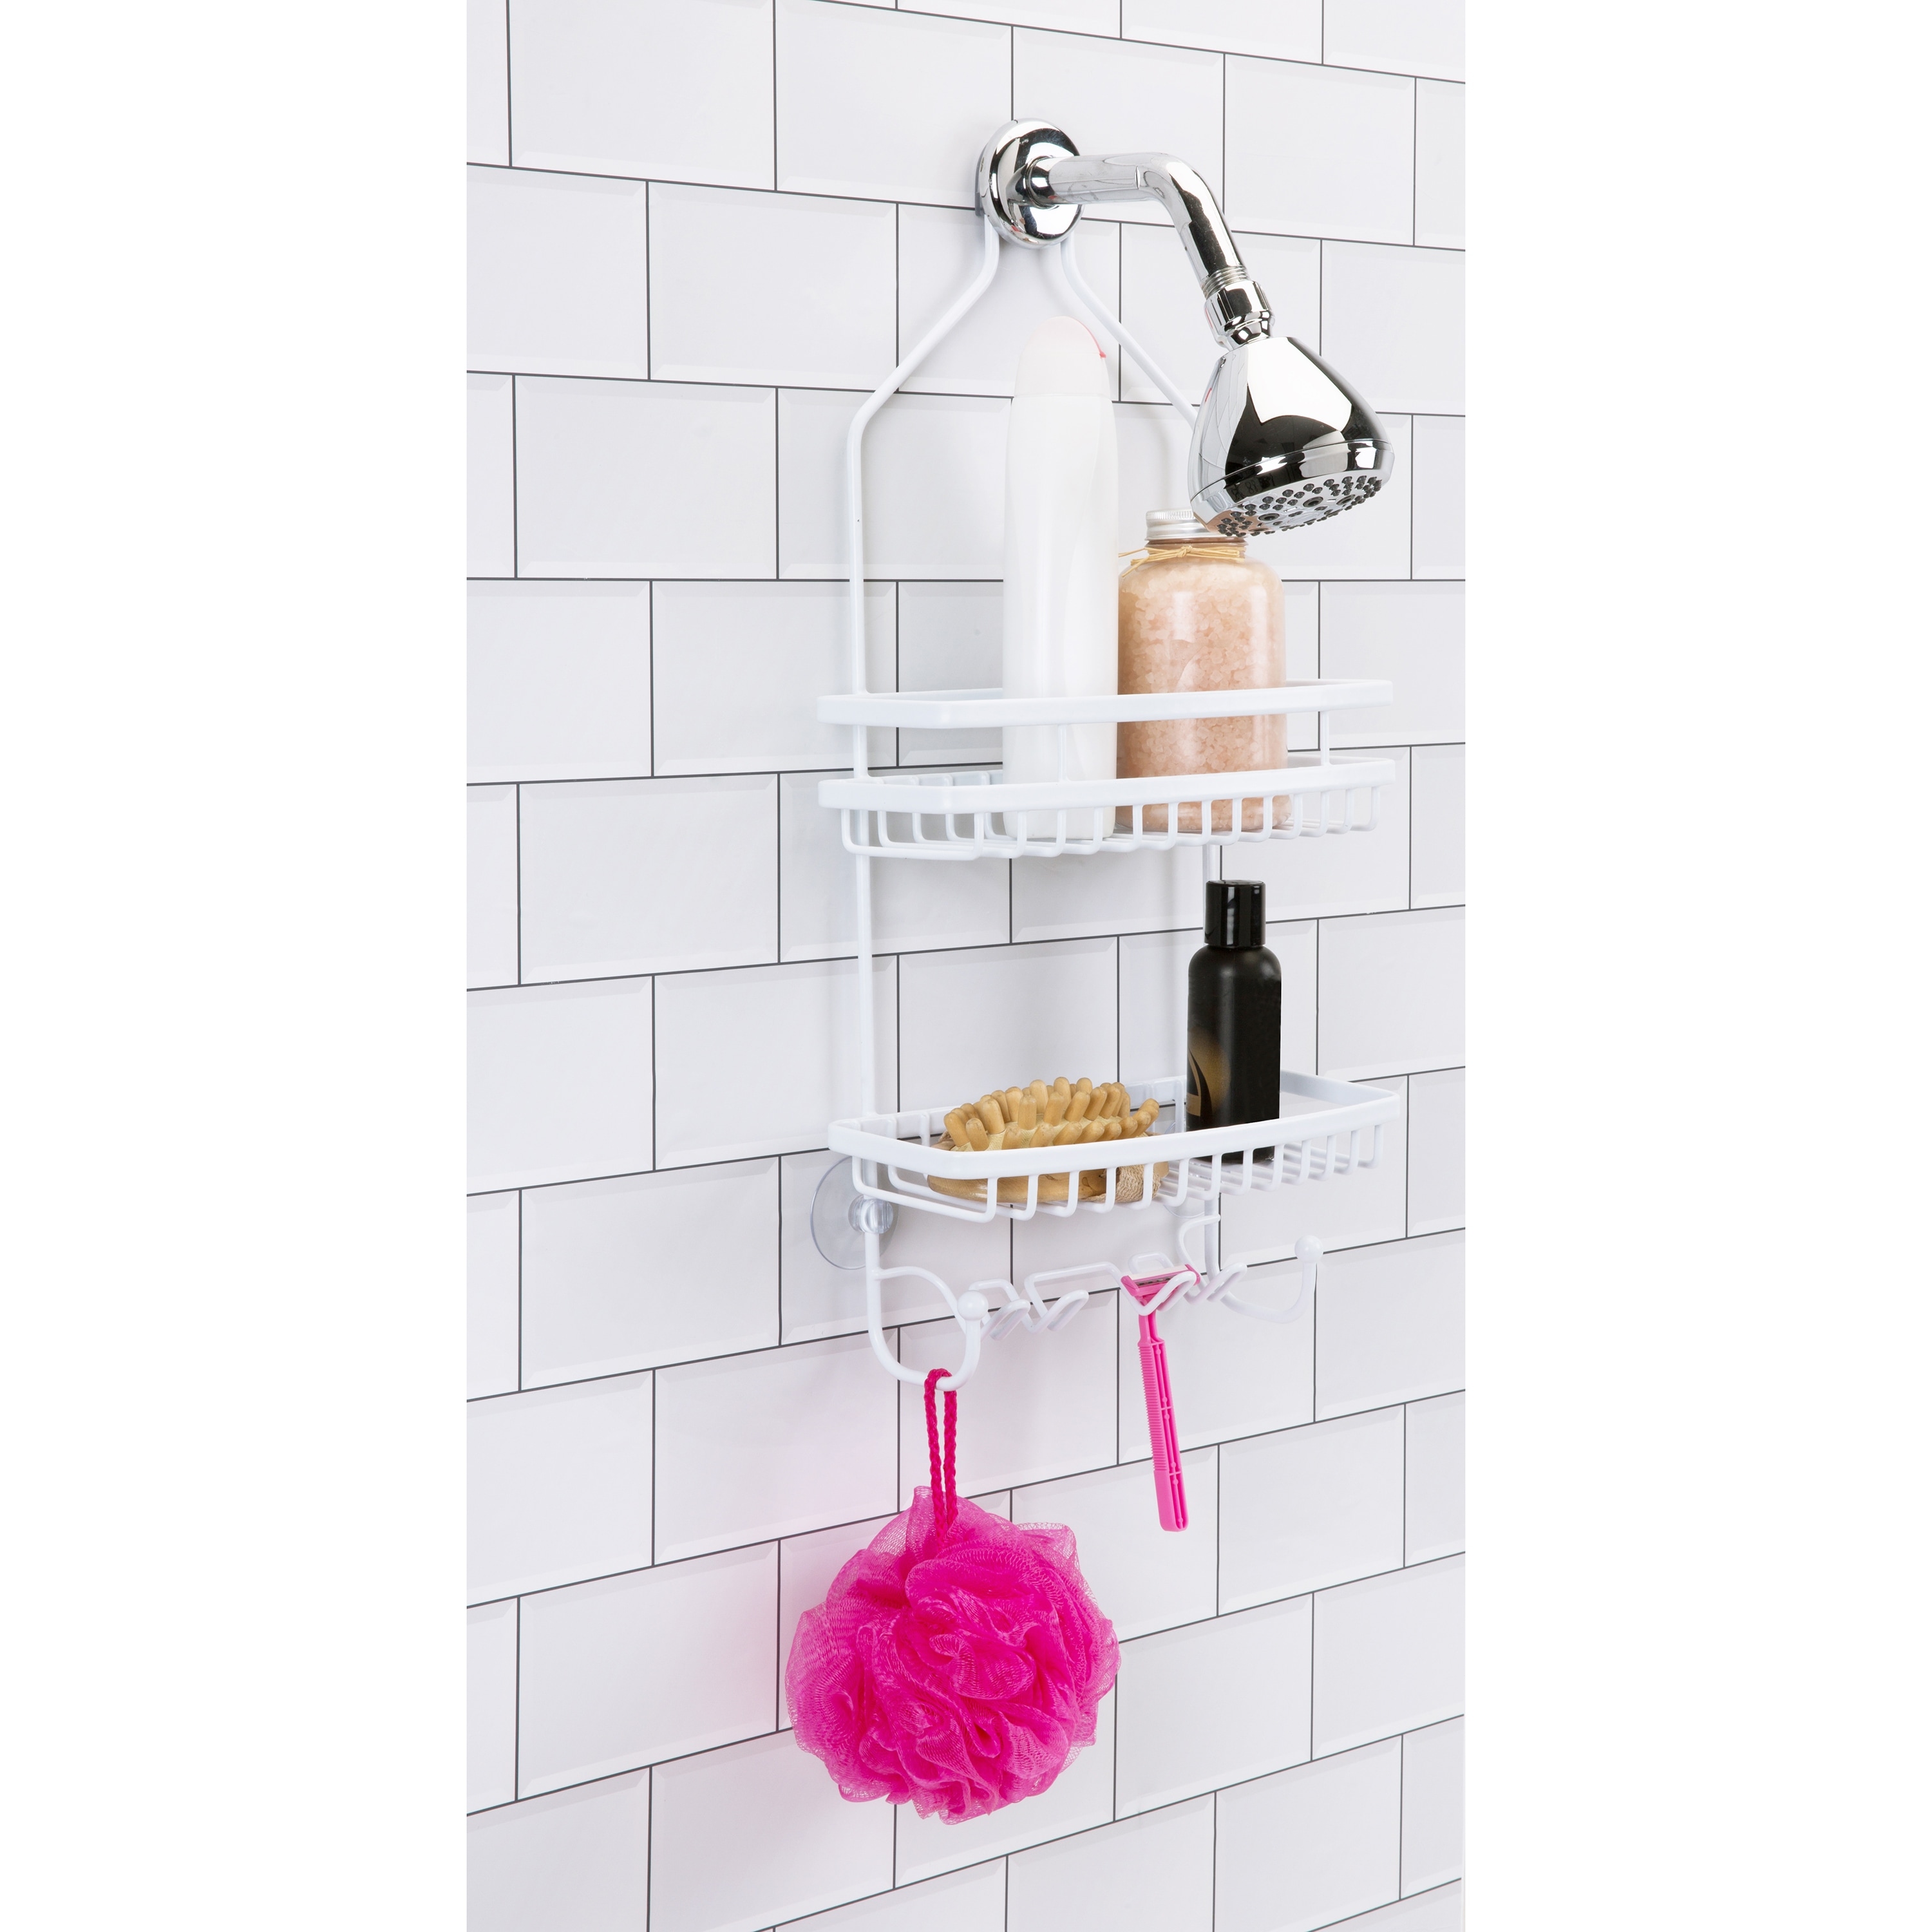 https://ak1.ostkcdn.com/images/products/is/images/direct/d03451c8169b77c9bd54150e2695a8bd4366b9bc/Bath-Bliss-Venice-Shower-Caddy-in-White.jpg